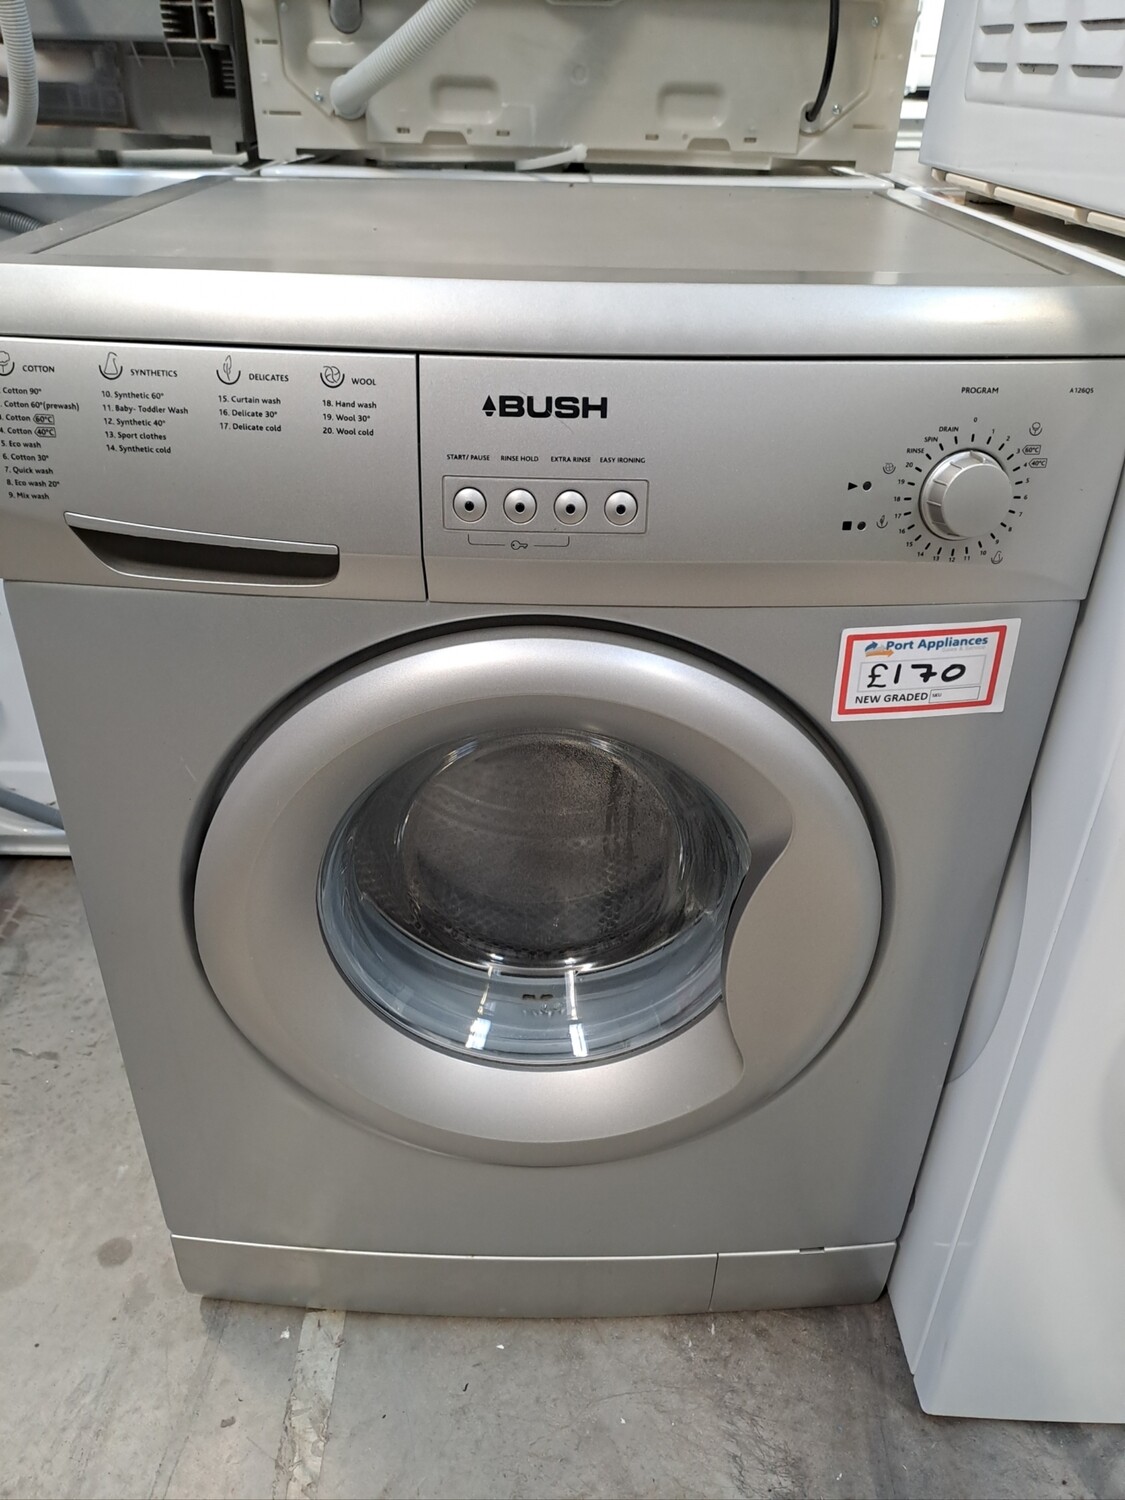 Bush 6kg Load, 1200 Spin Washing Machine - Silver - New Graded - 12 Month Guarantee. Located In our Whitby Road Shop 